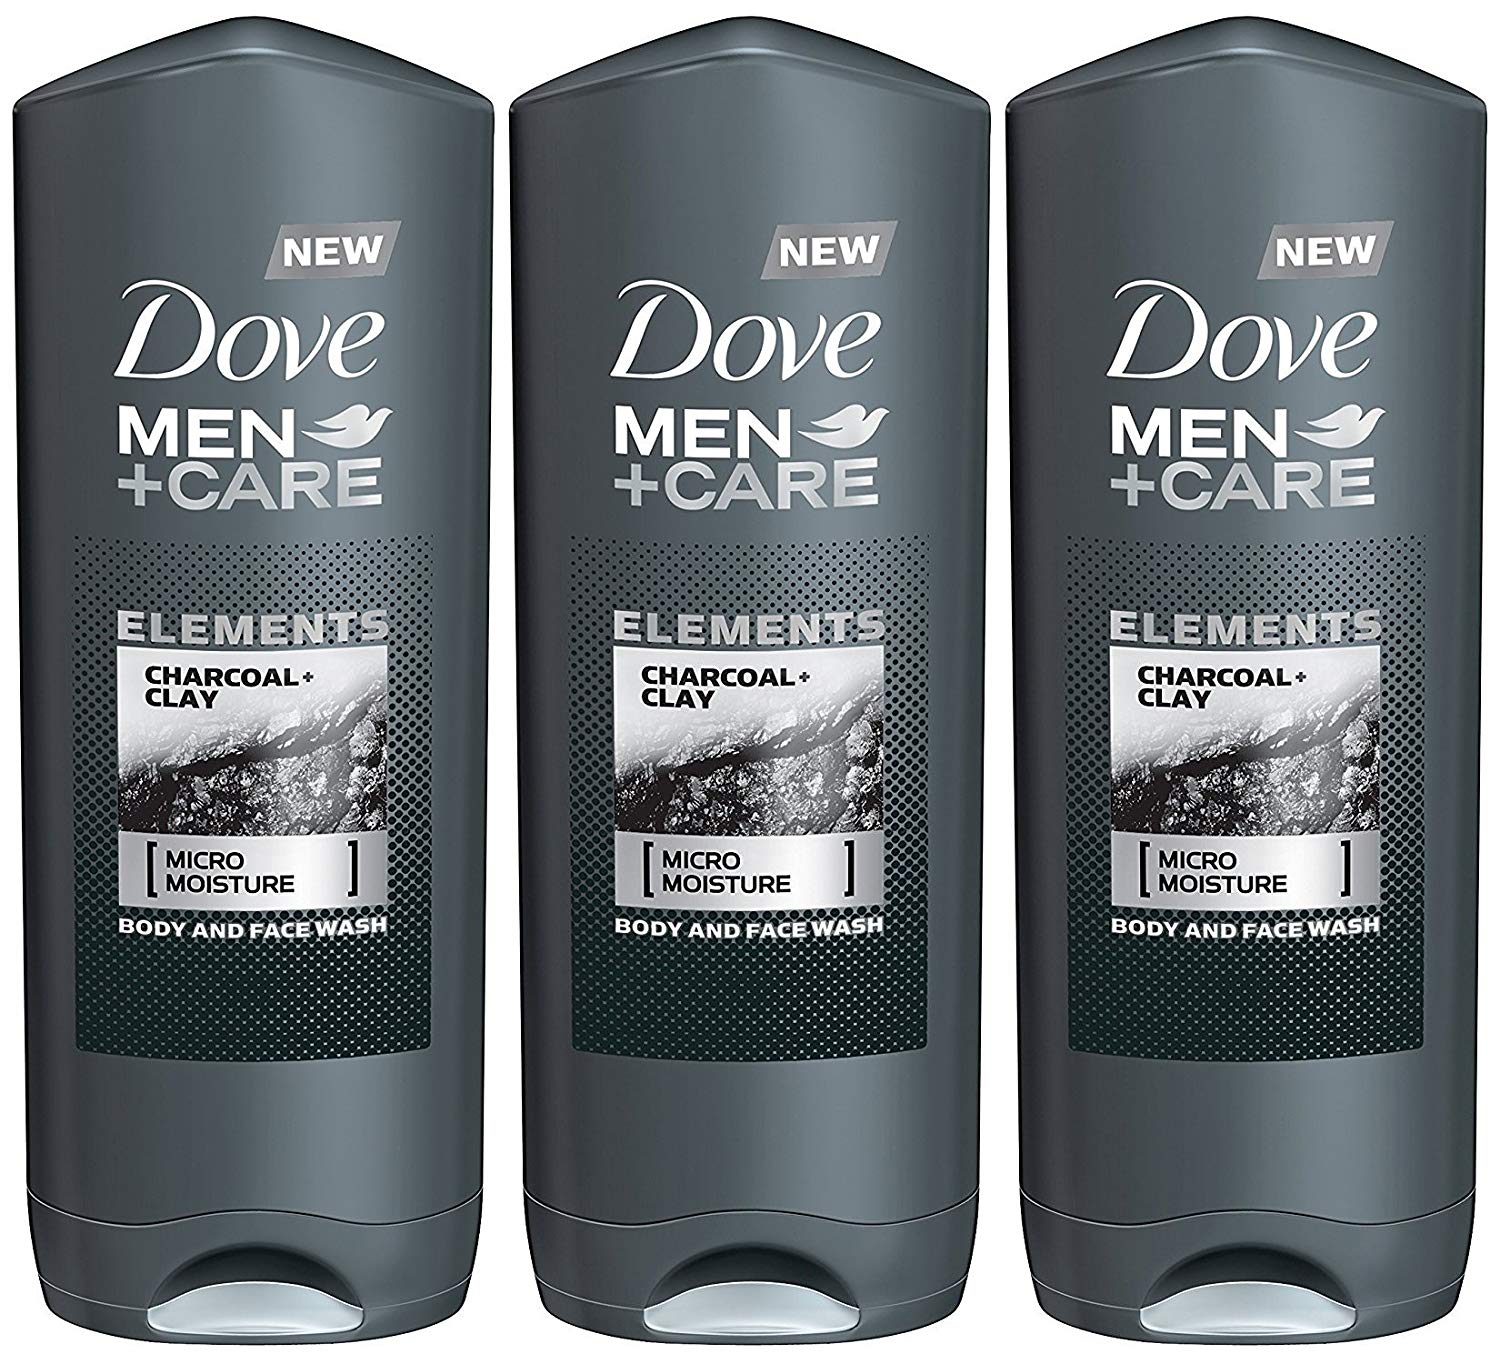 Dove Men + Care Elements Body Wash - Charcoal and Clay - 13.5 Ounce (Pack of 3)